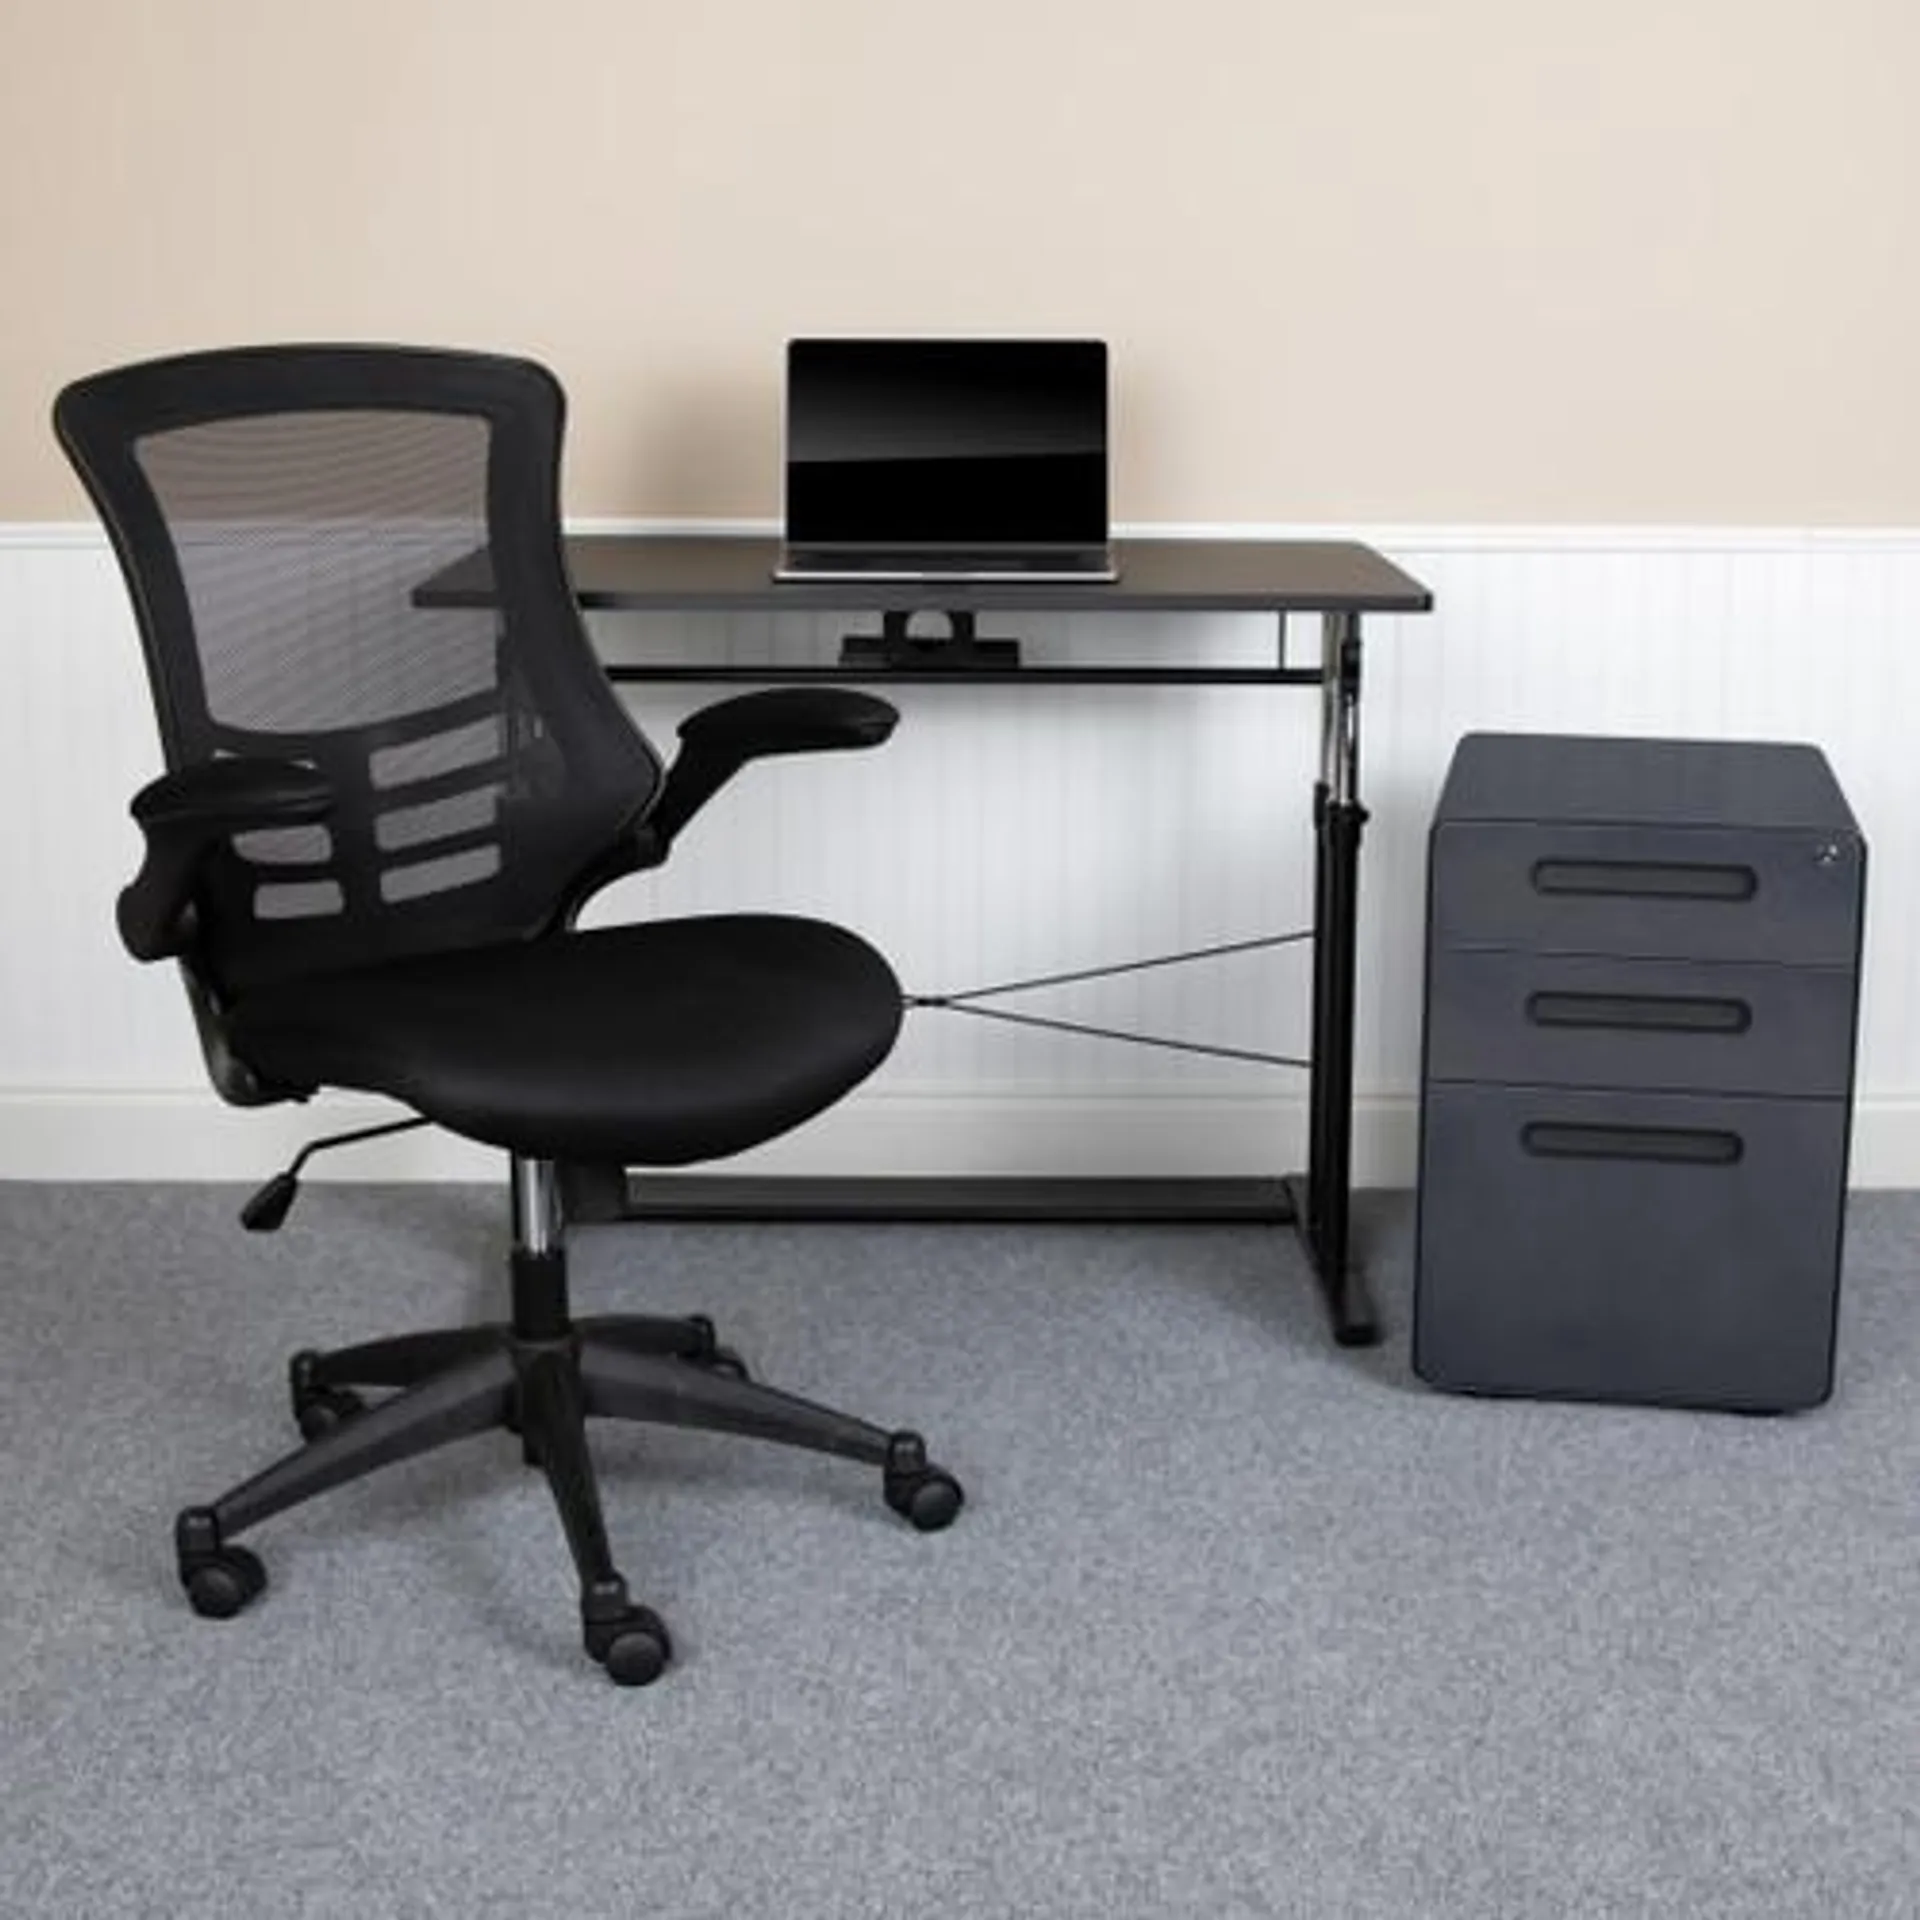 Work From Home Kit - Adjustable Computer Desk, Ergonomic Mesh Office Chair and Locking Mobile Filing Cabinet with Inset Handles - BLNNAN21APX5LBKGG